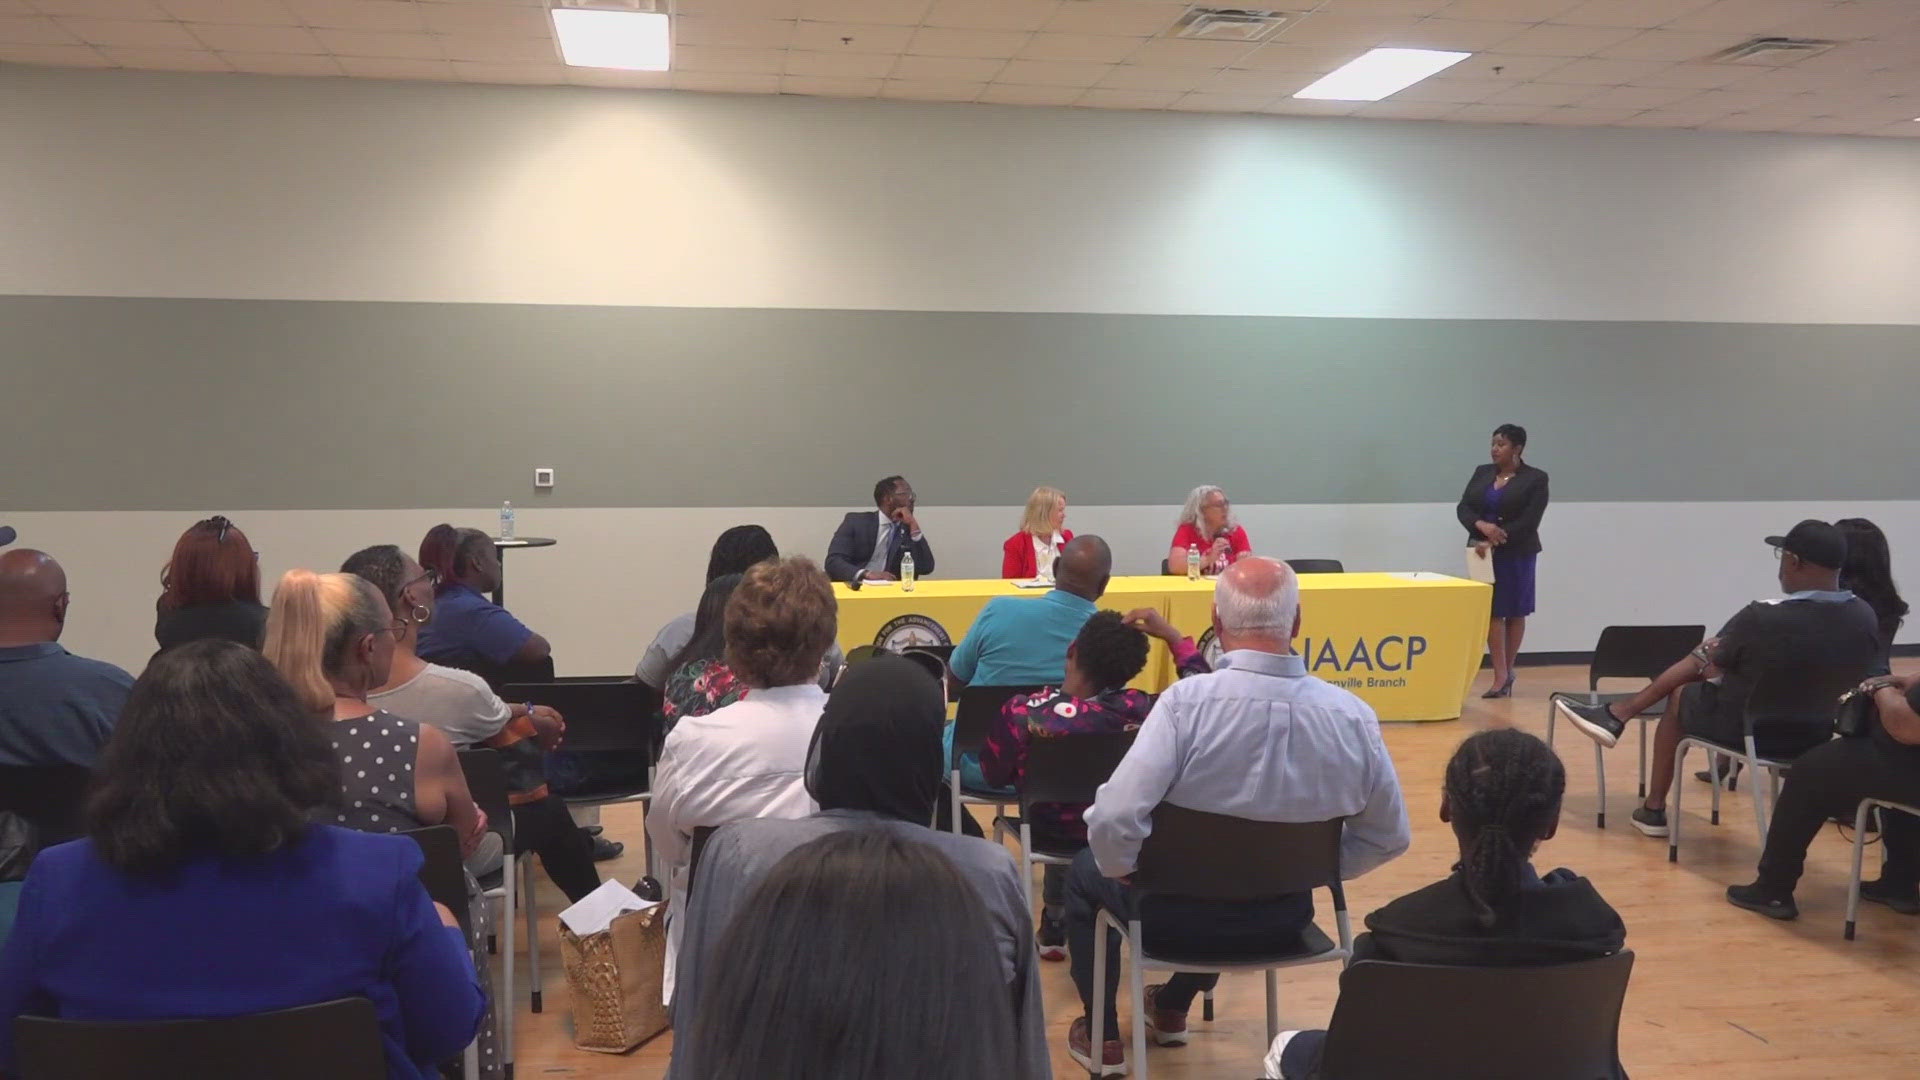 School board chair Darryl Willie and superintendent Dr. Dana Kriznar spoke to parents, teachers, and NAACP members about why the district needs to consolidate.